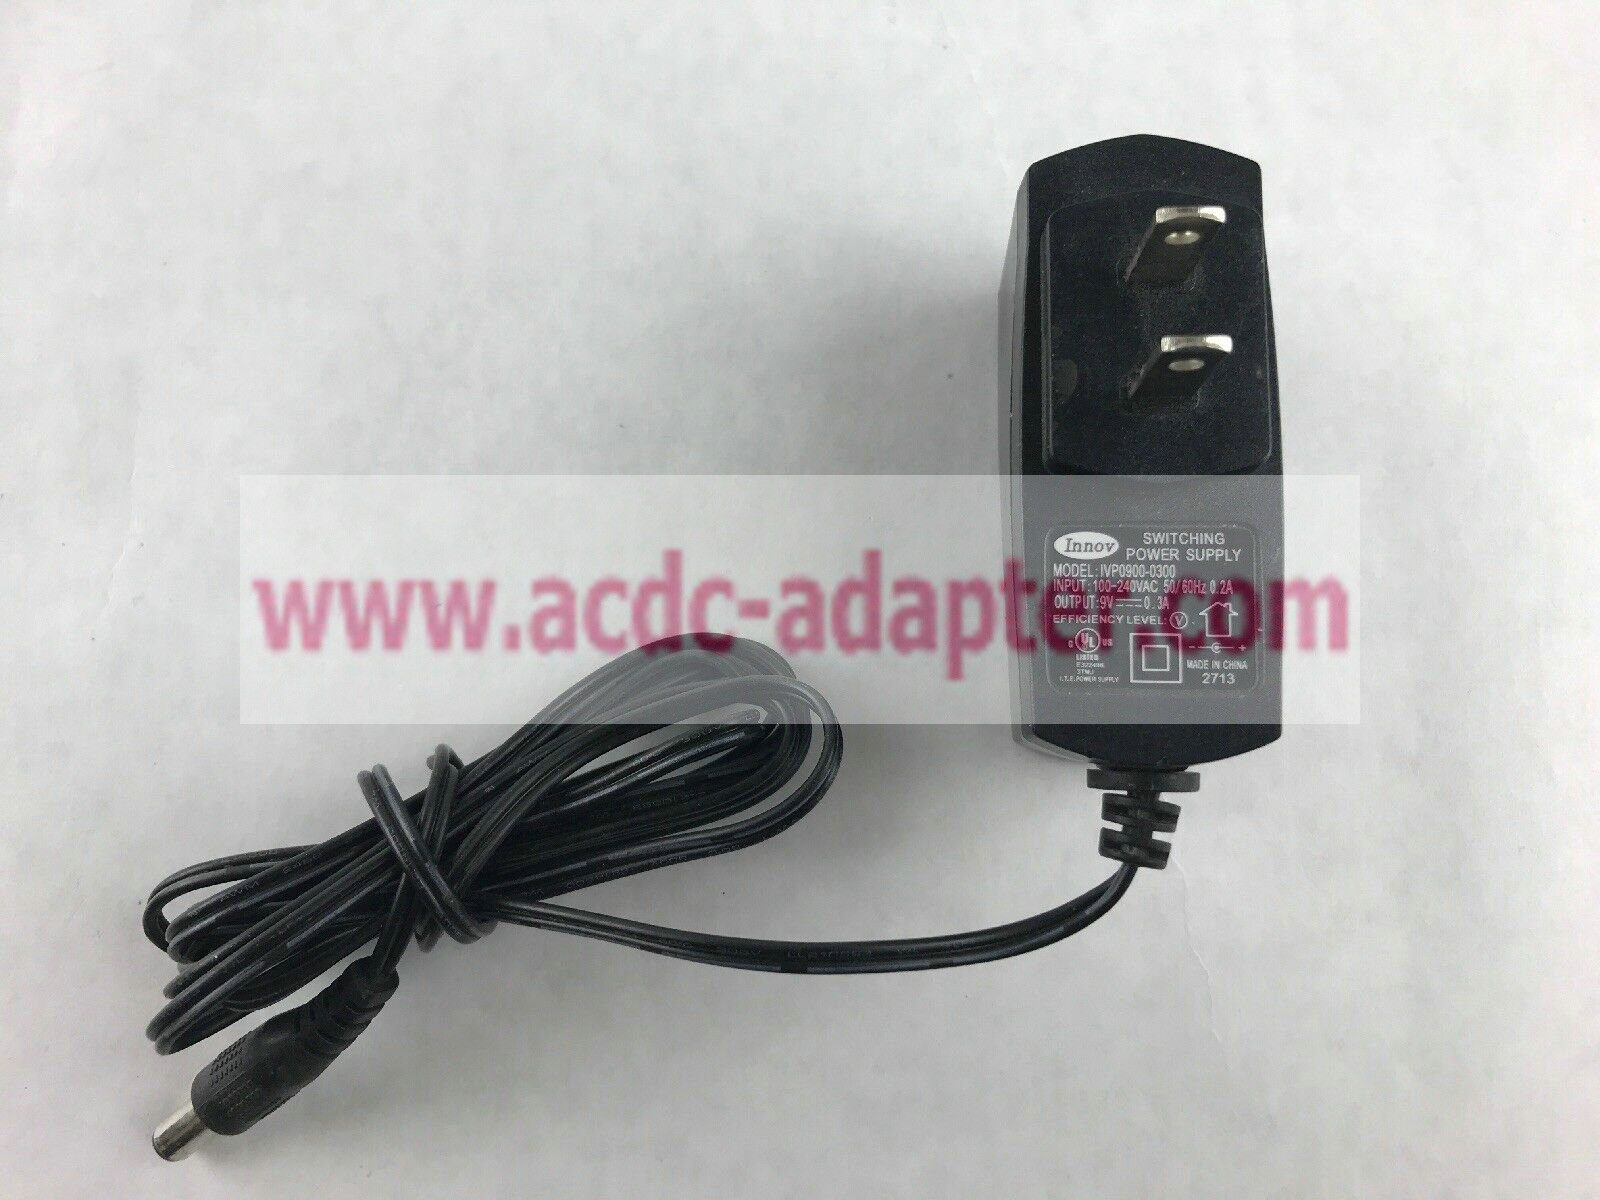 Innov IVP0900-0300 9V 0.3A Switching Power Supply AC/DC Power Adapter